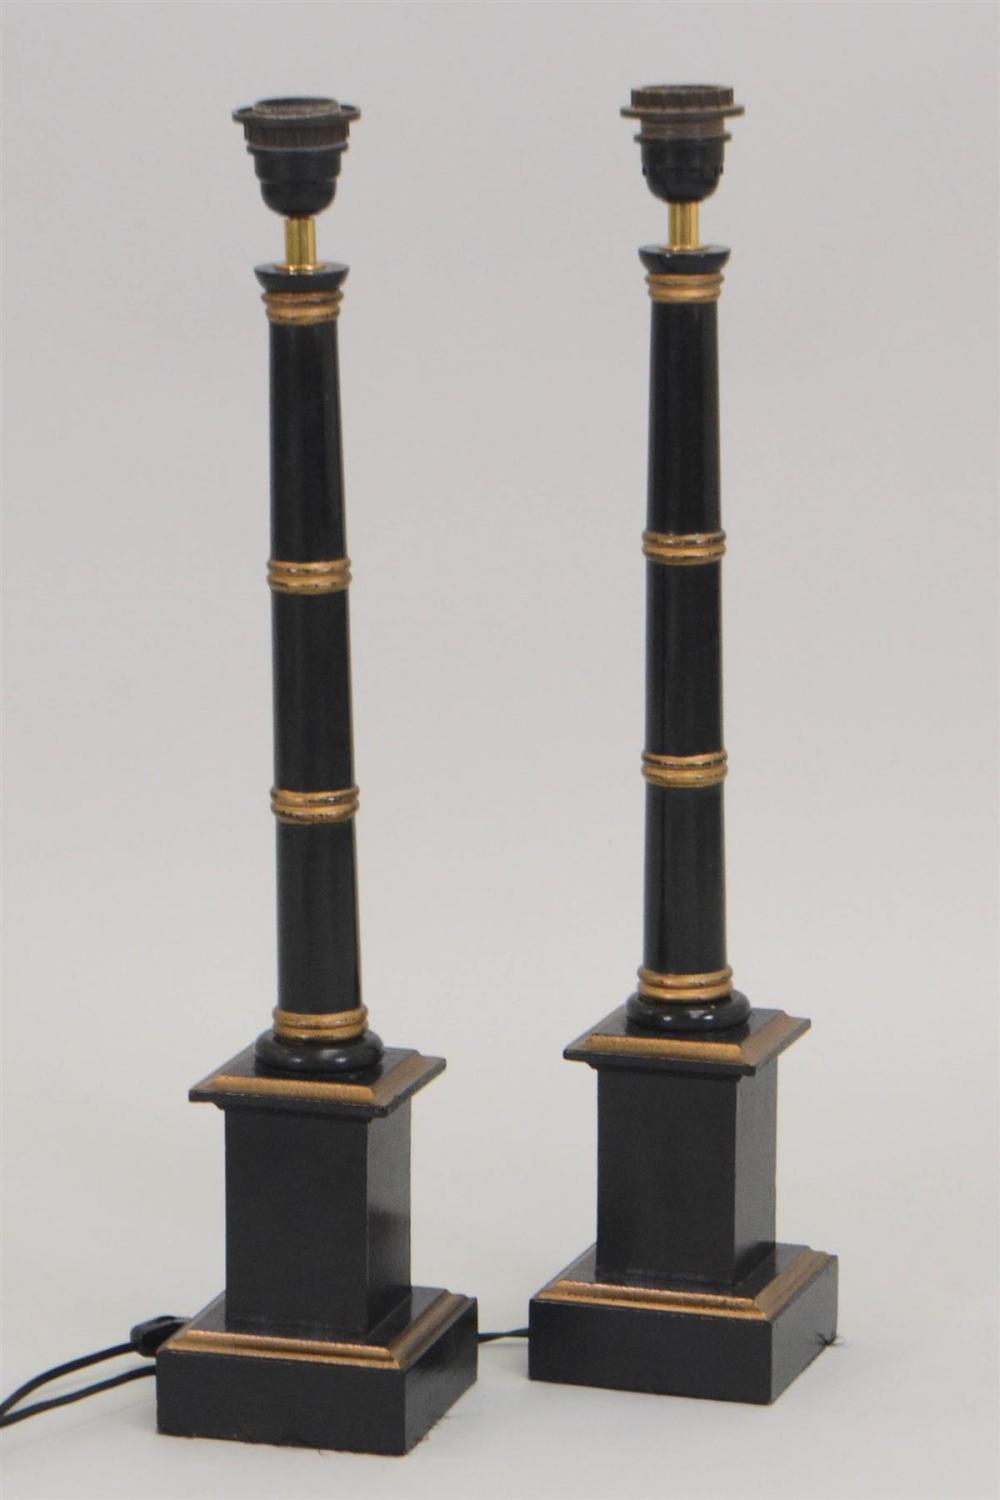 PAIR OF REGENCY STYLE GOLD AND